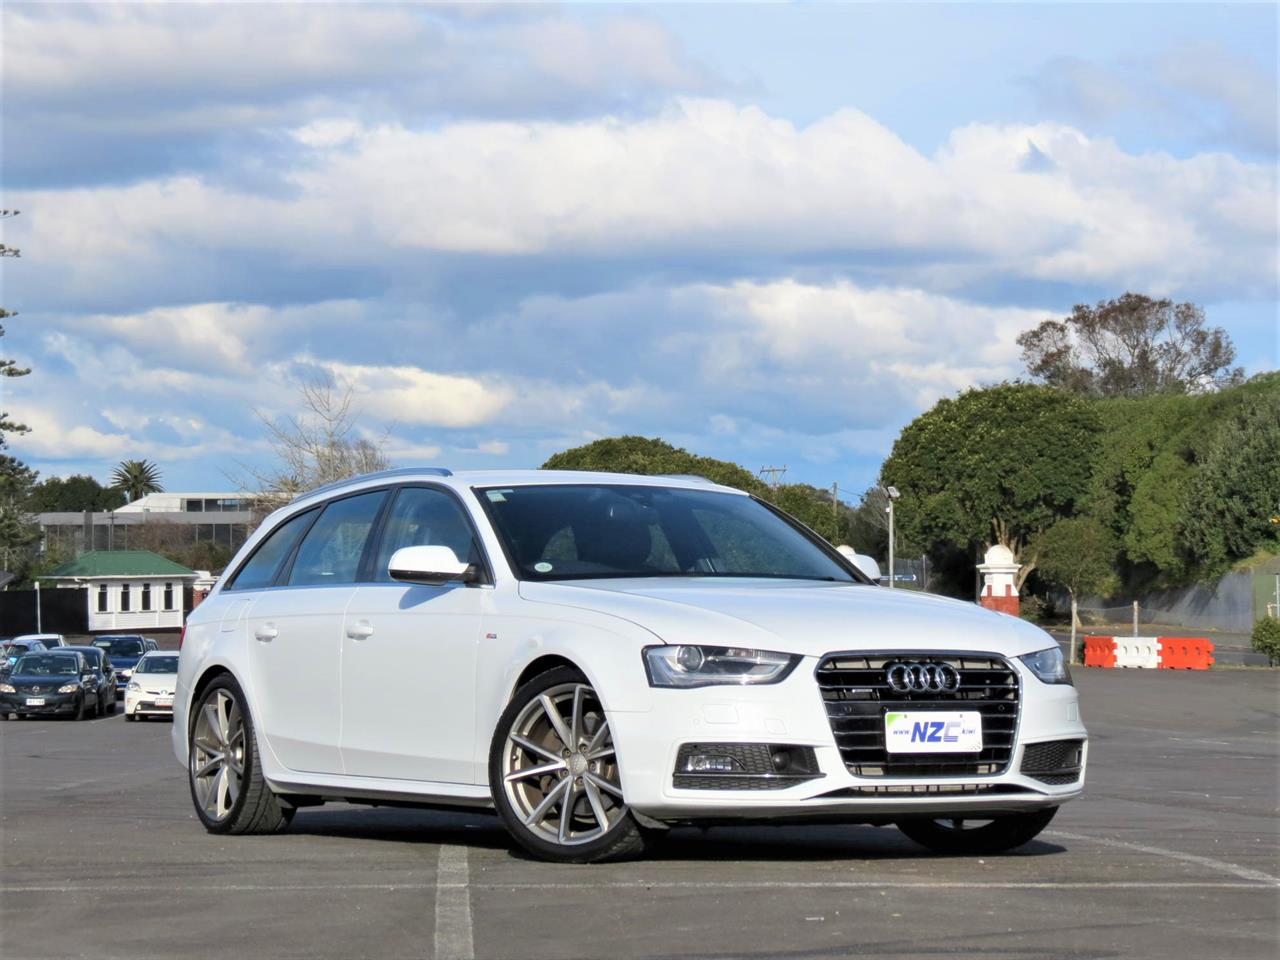 NZC 2016 Audi A4 just arrived to Auckland